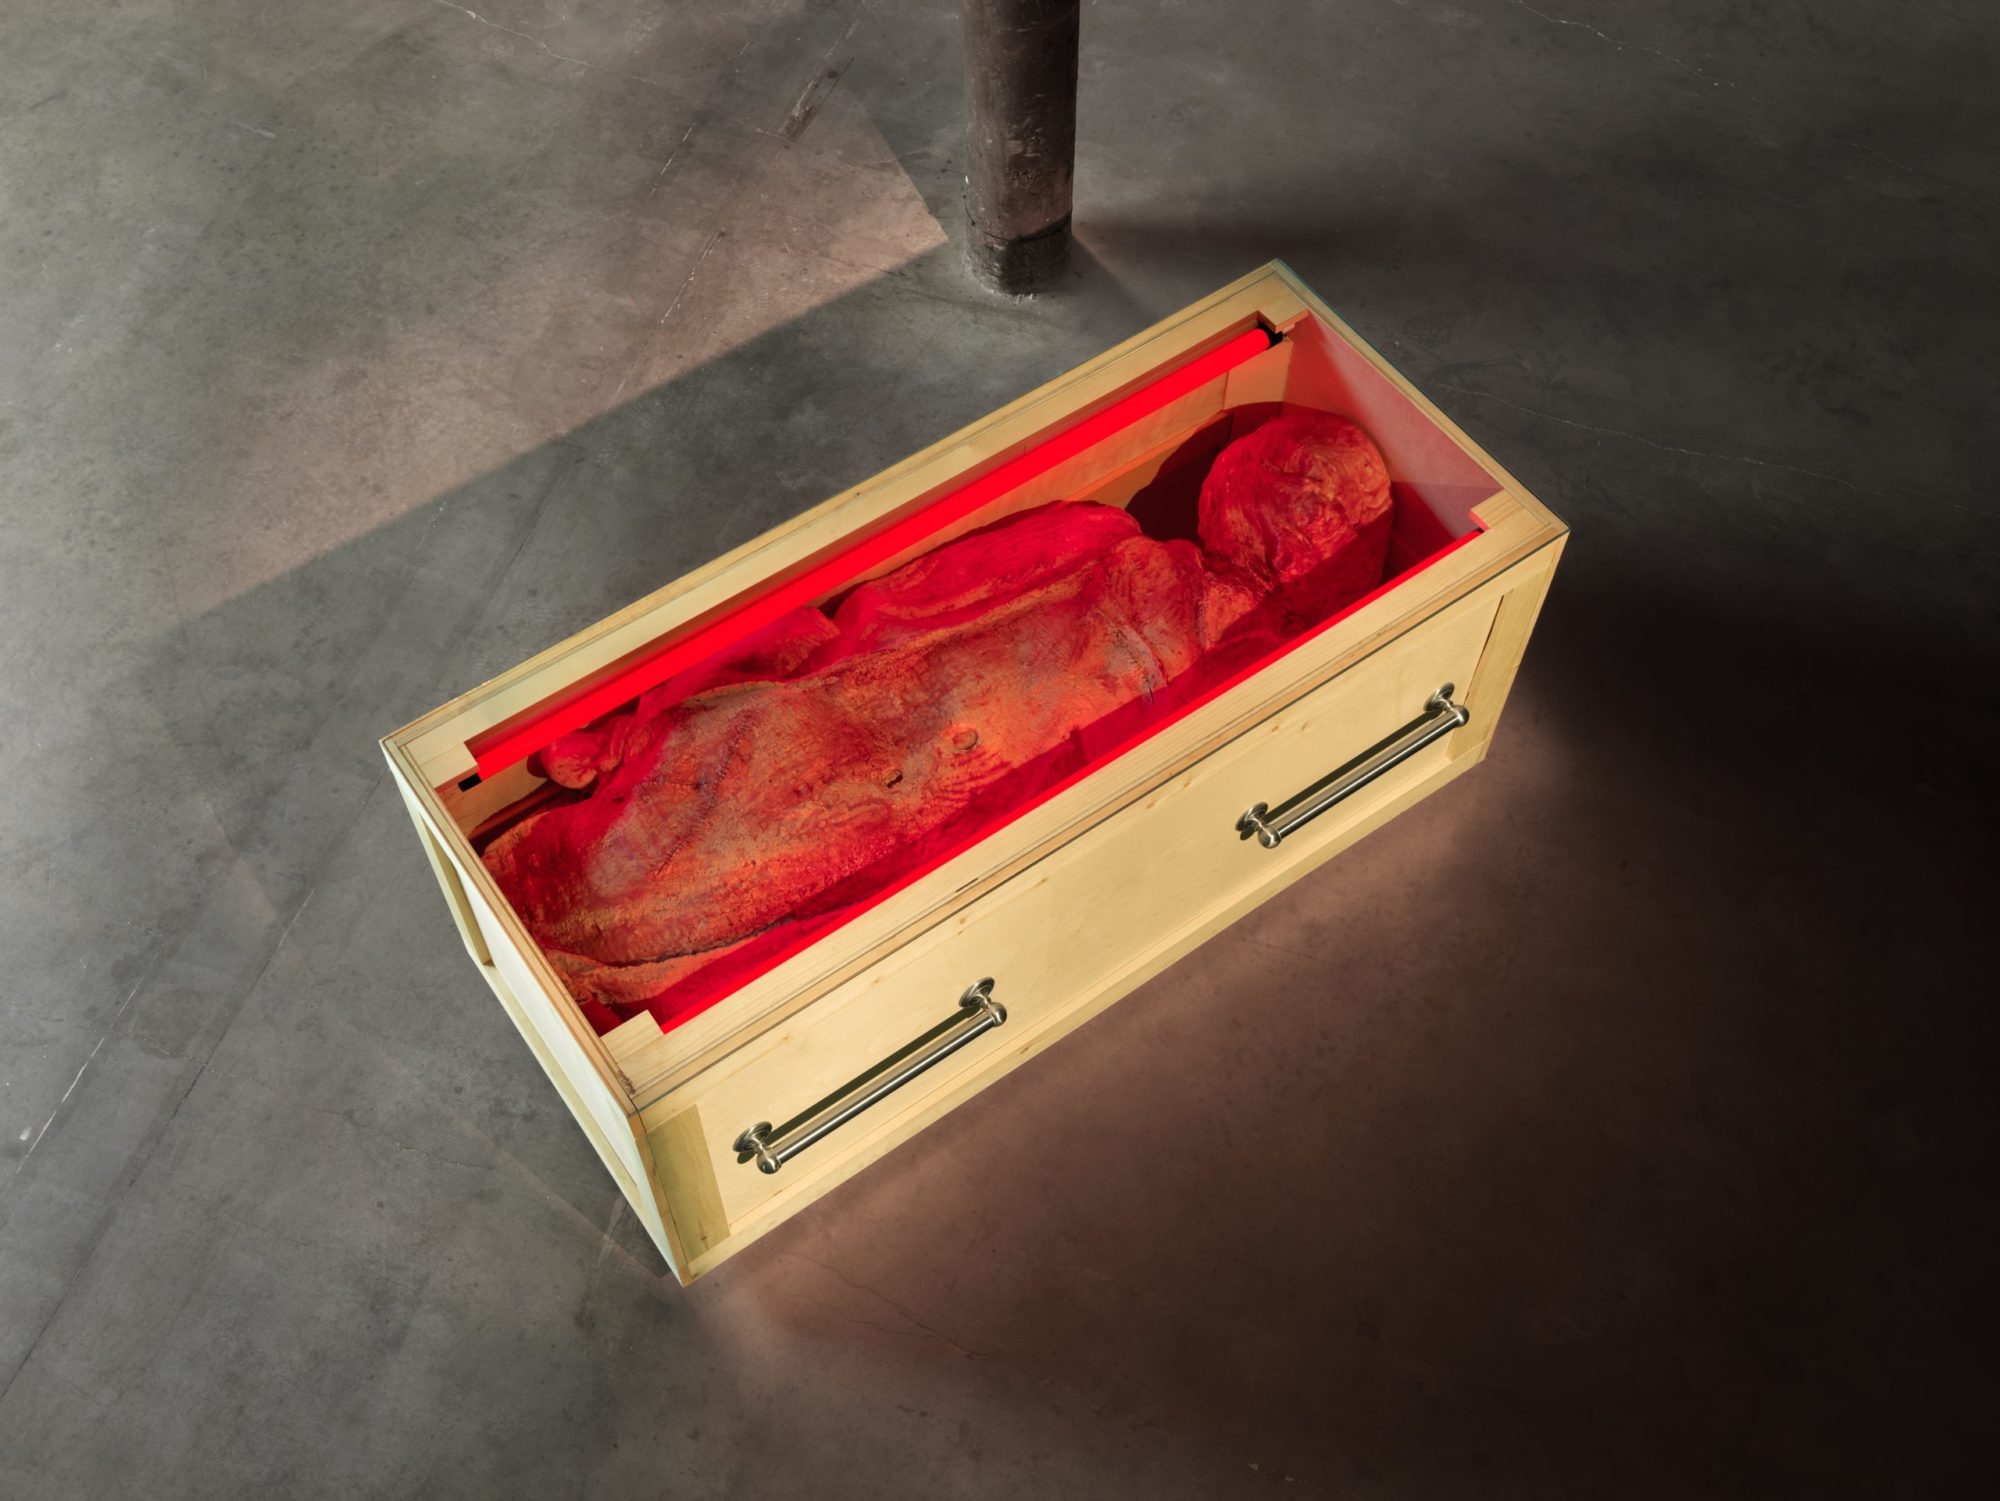 Body in wood coffin cast in red light upon gray concrete floor